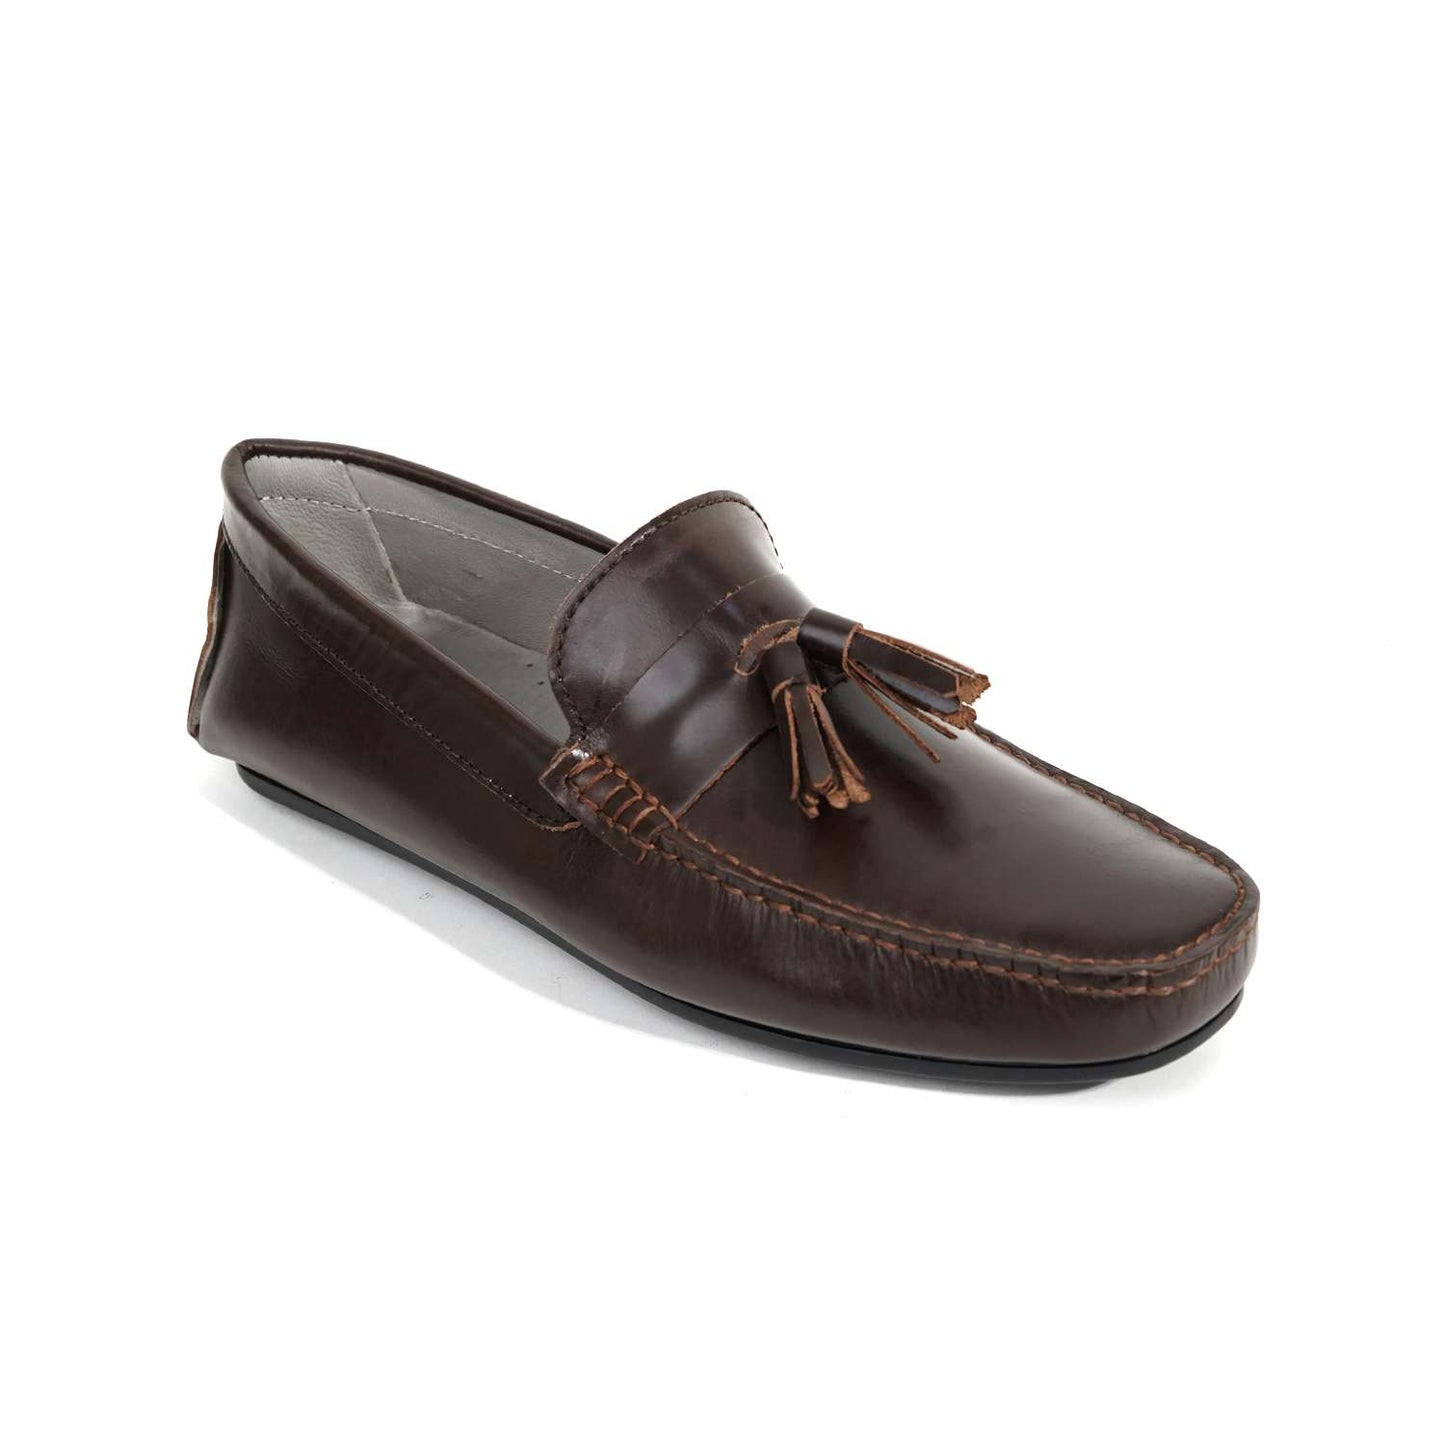 Day-To-Day Basic Loafers Tassel